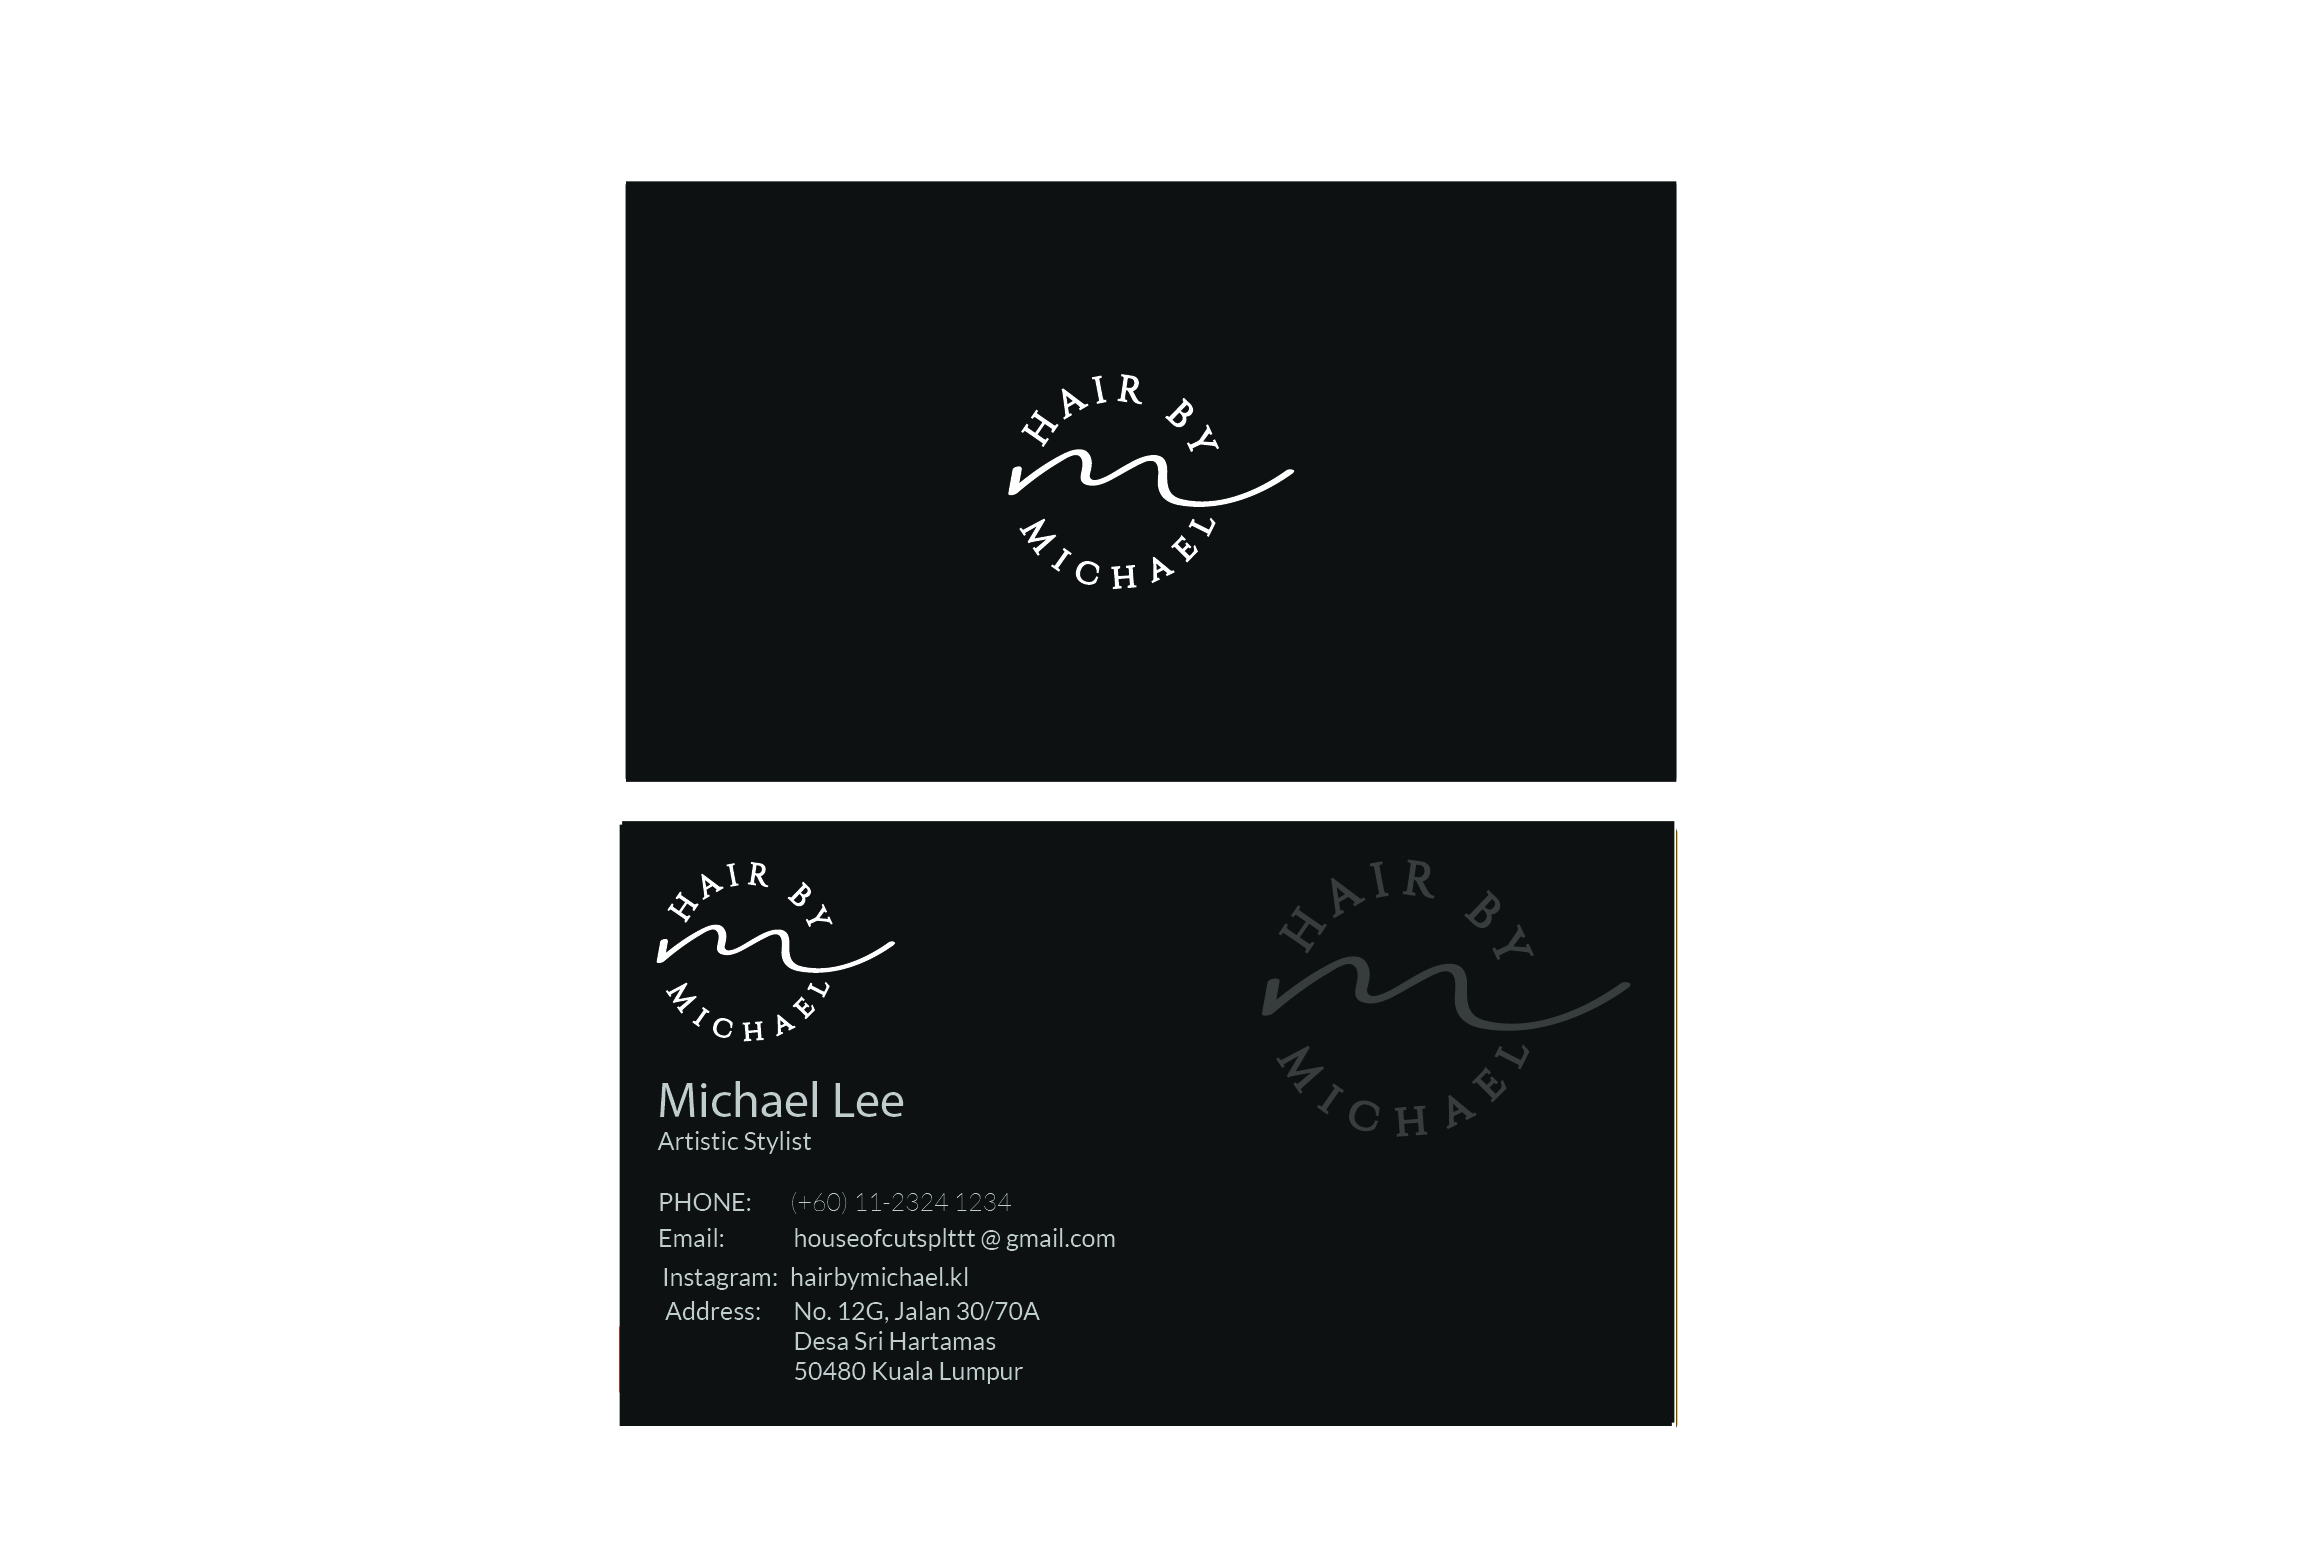 Design Professional And luxary Business Card For You